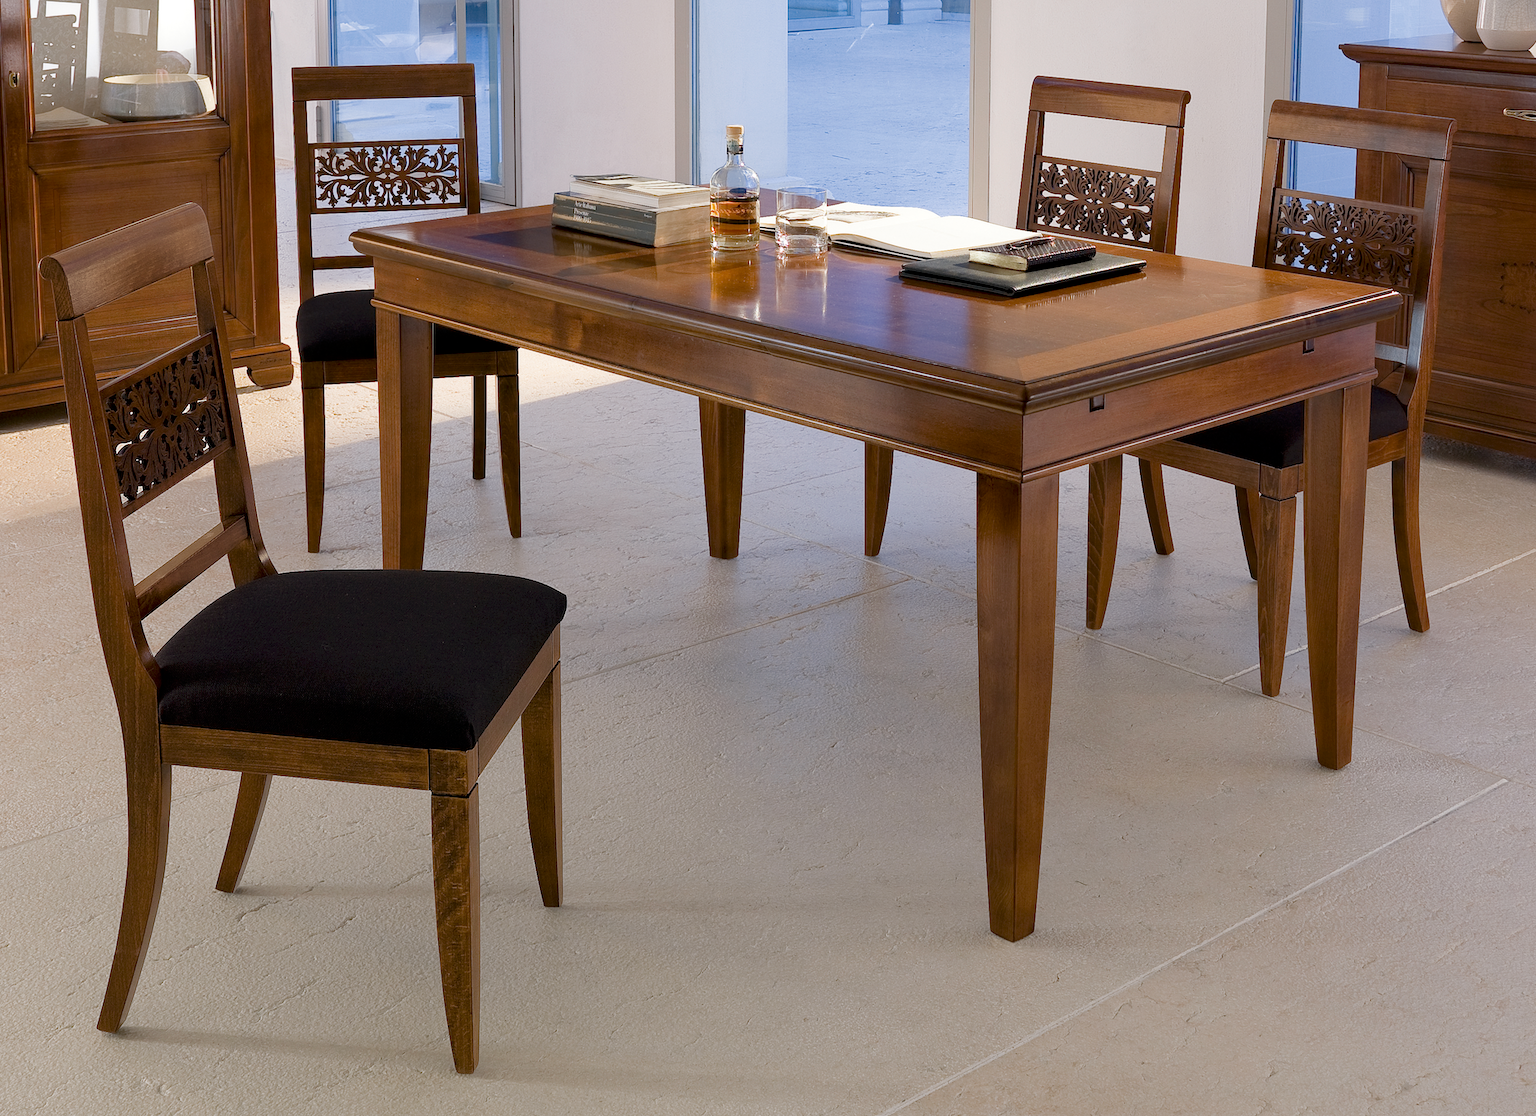 Classic Extendable Rectangular Table L 160 with 6 Classic Chairs in Cherry Wood and Real Leather Arte Piombini Collection